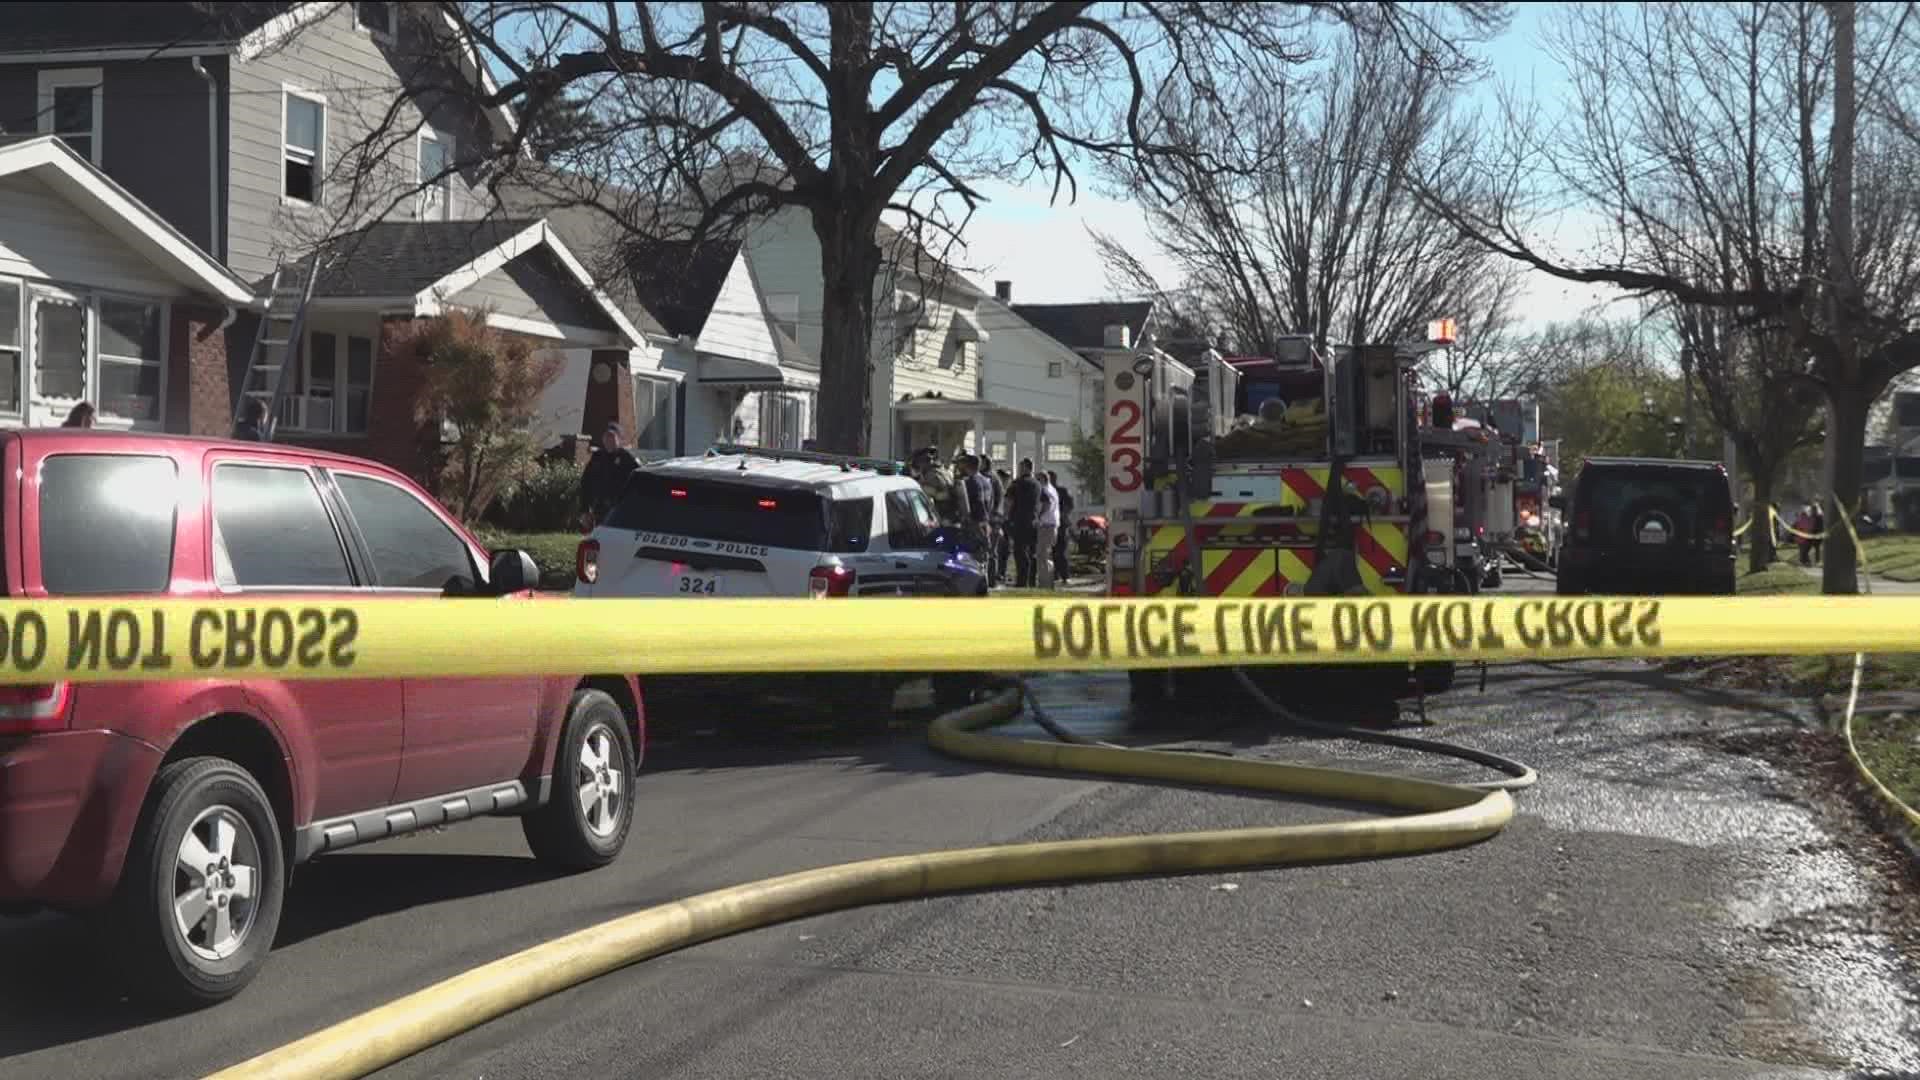 The bodies of a man and woman were recovered during a house fire on Leybourn Avenue Wednesday. The coroner's office ruled the deaths a homicide and a suicide.